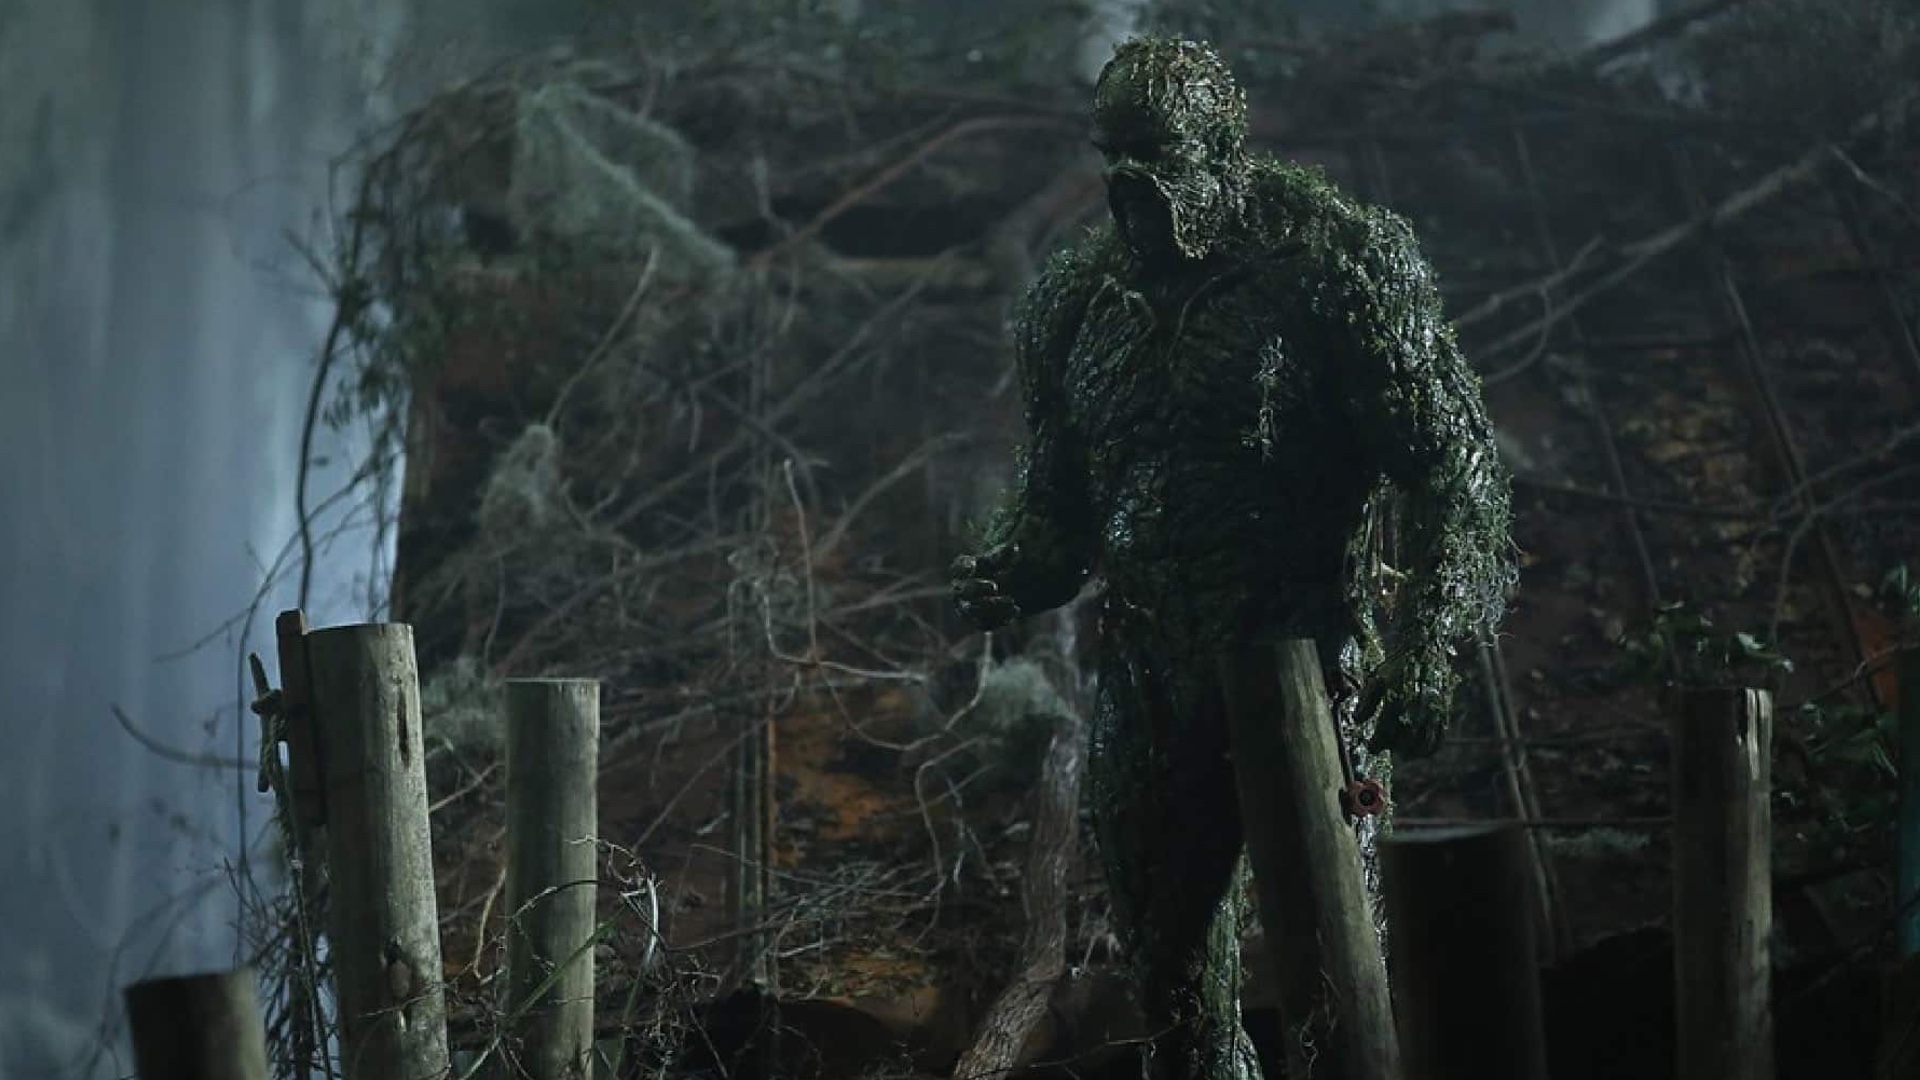 'Swamp Thing' is both excellent and unexpected